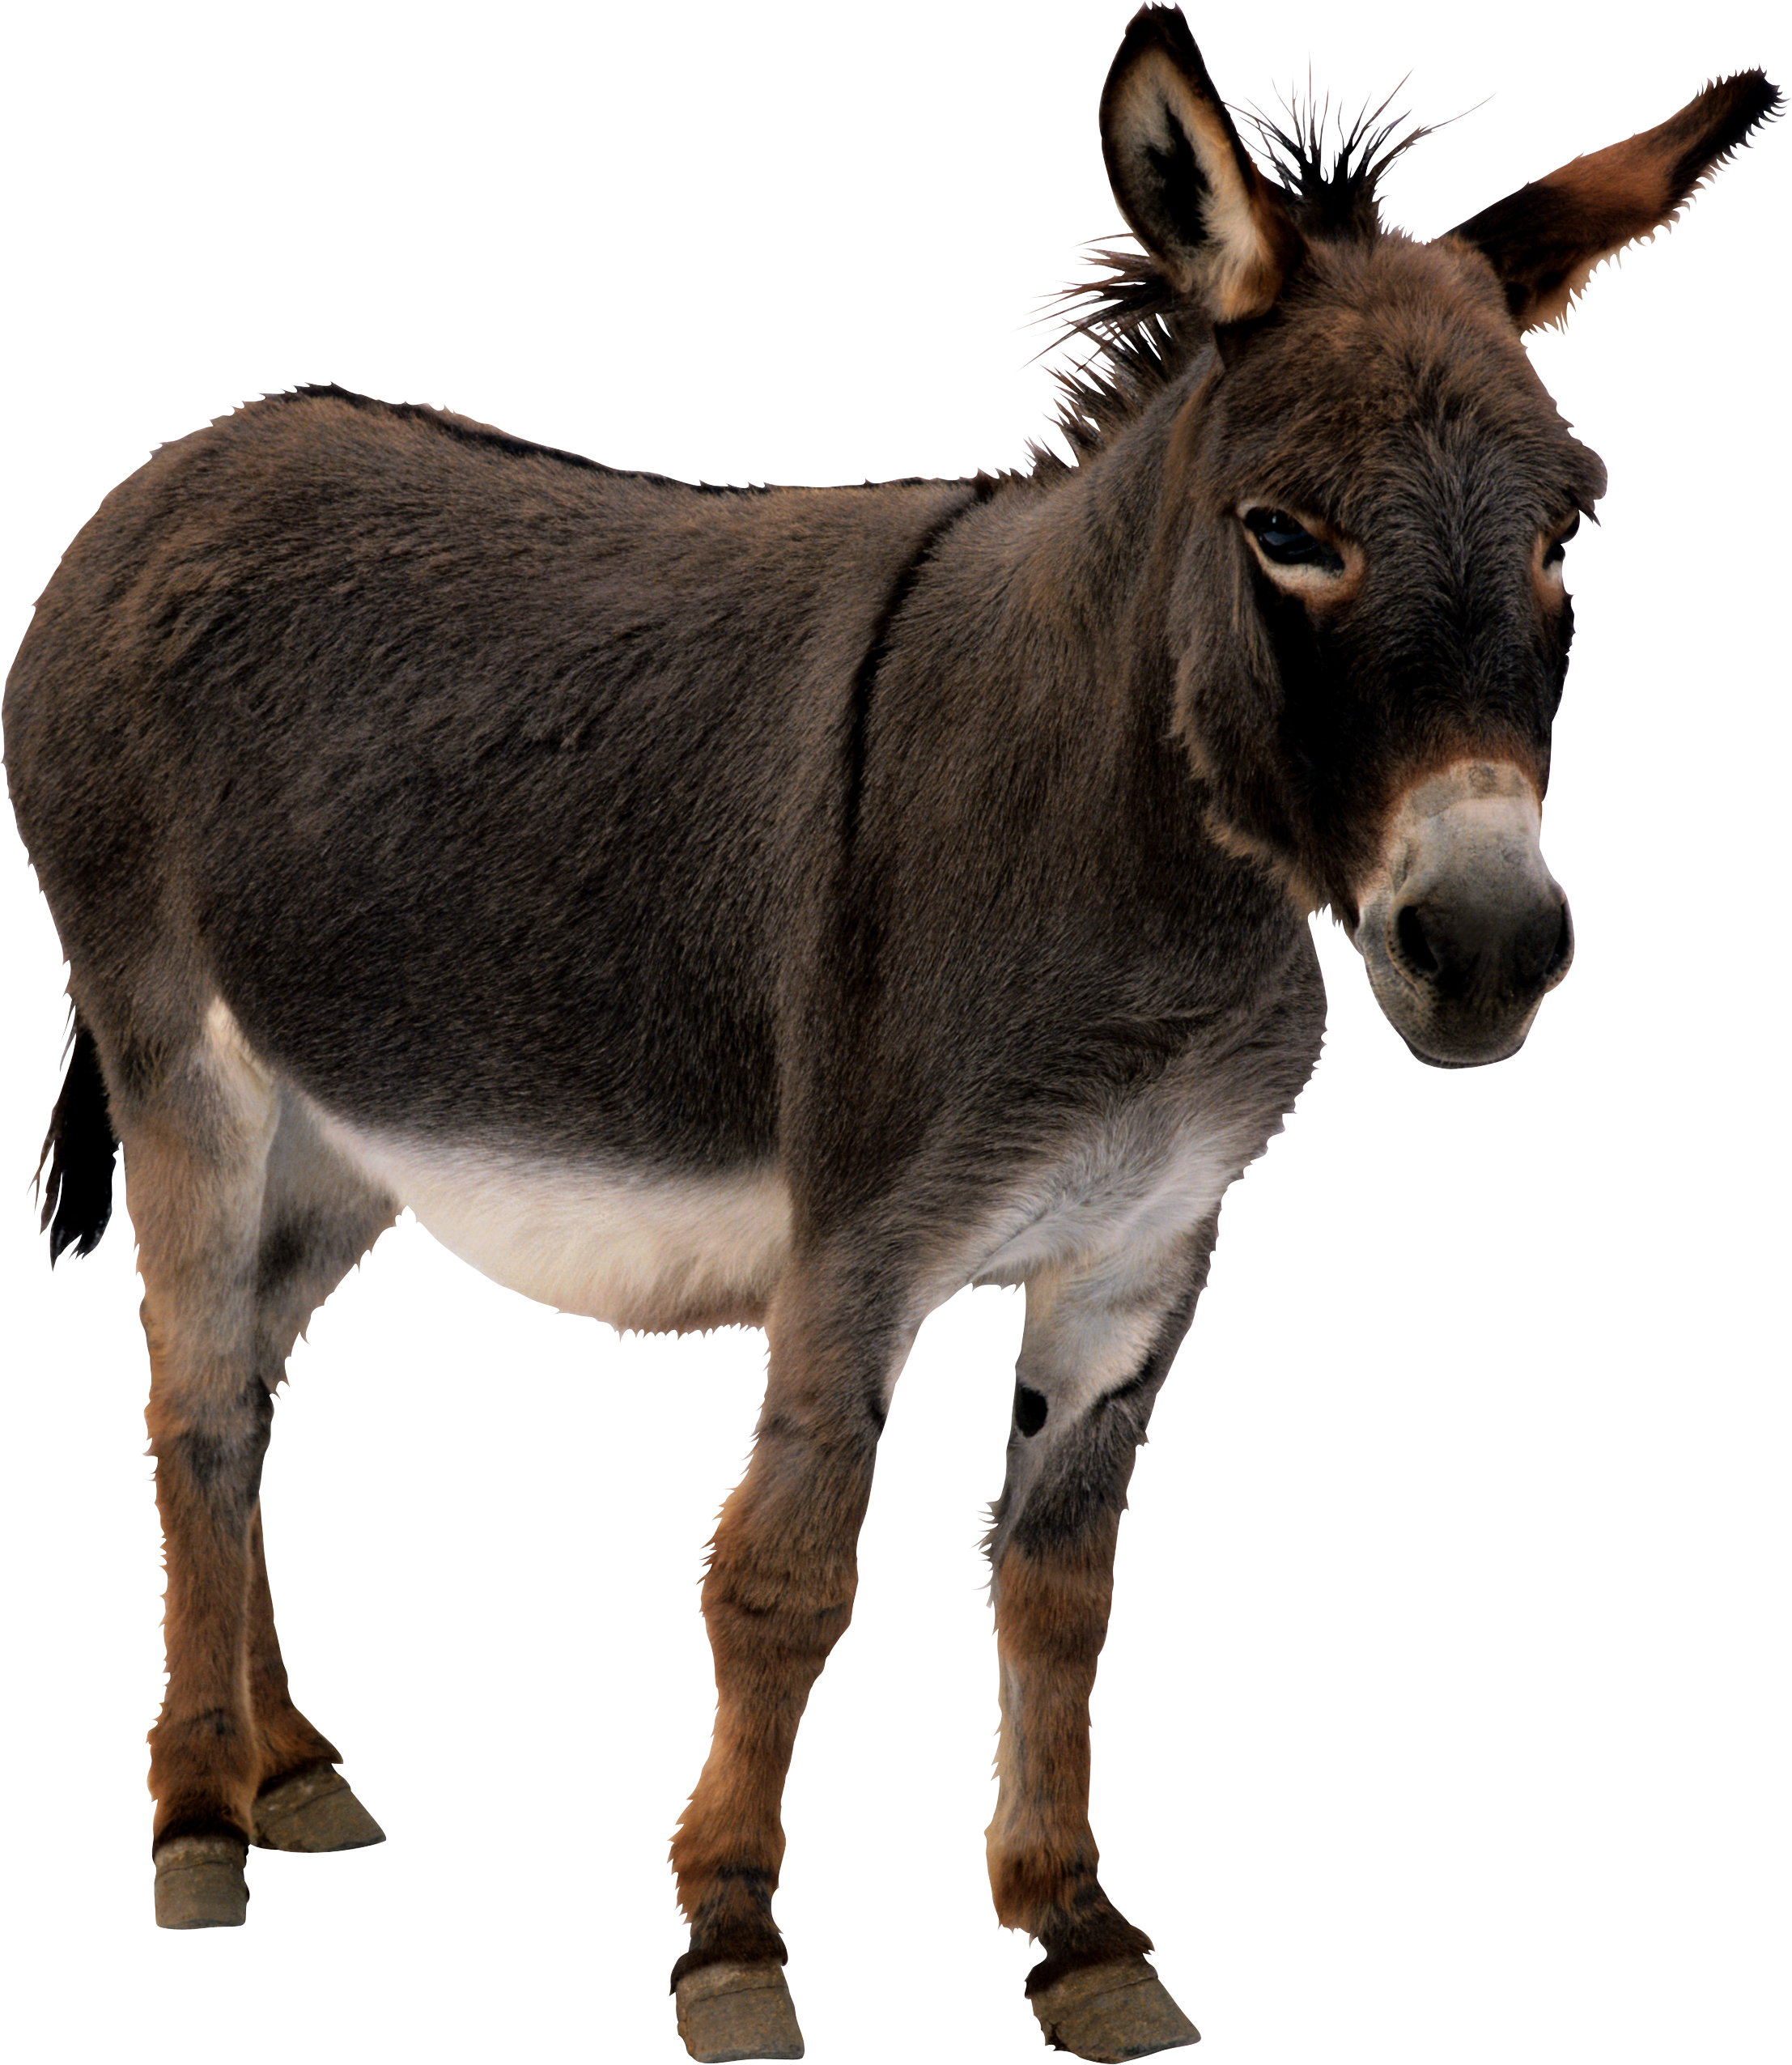 A mule is the offspring of a 